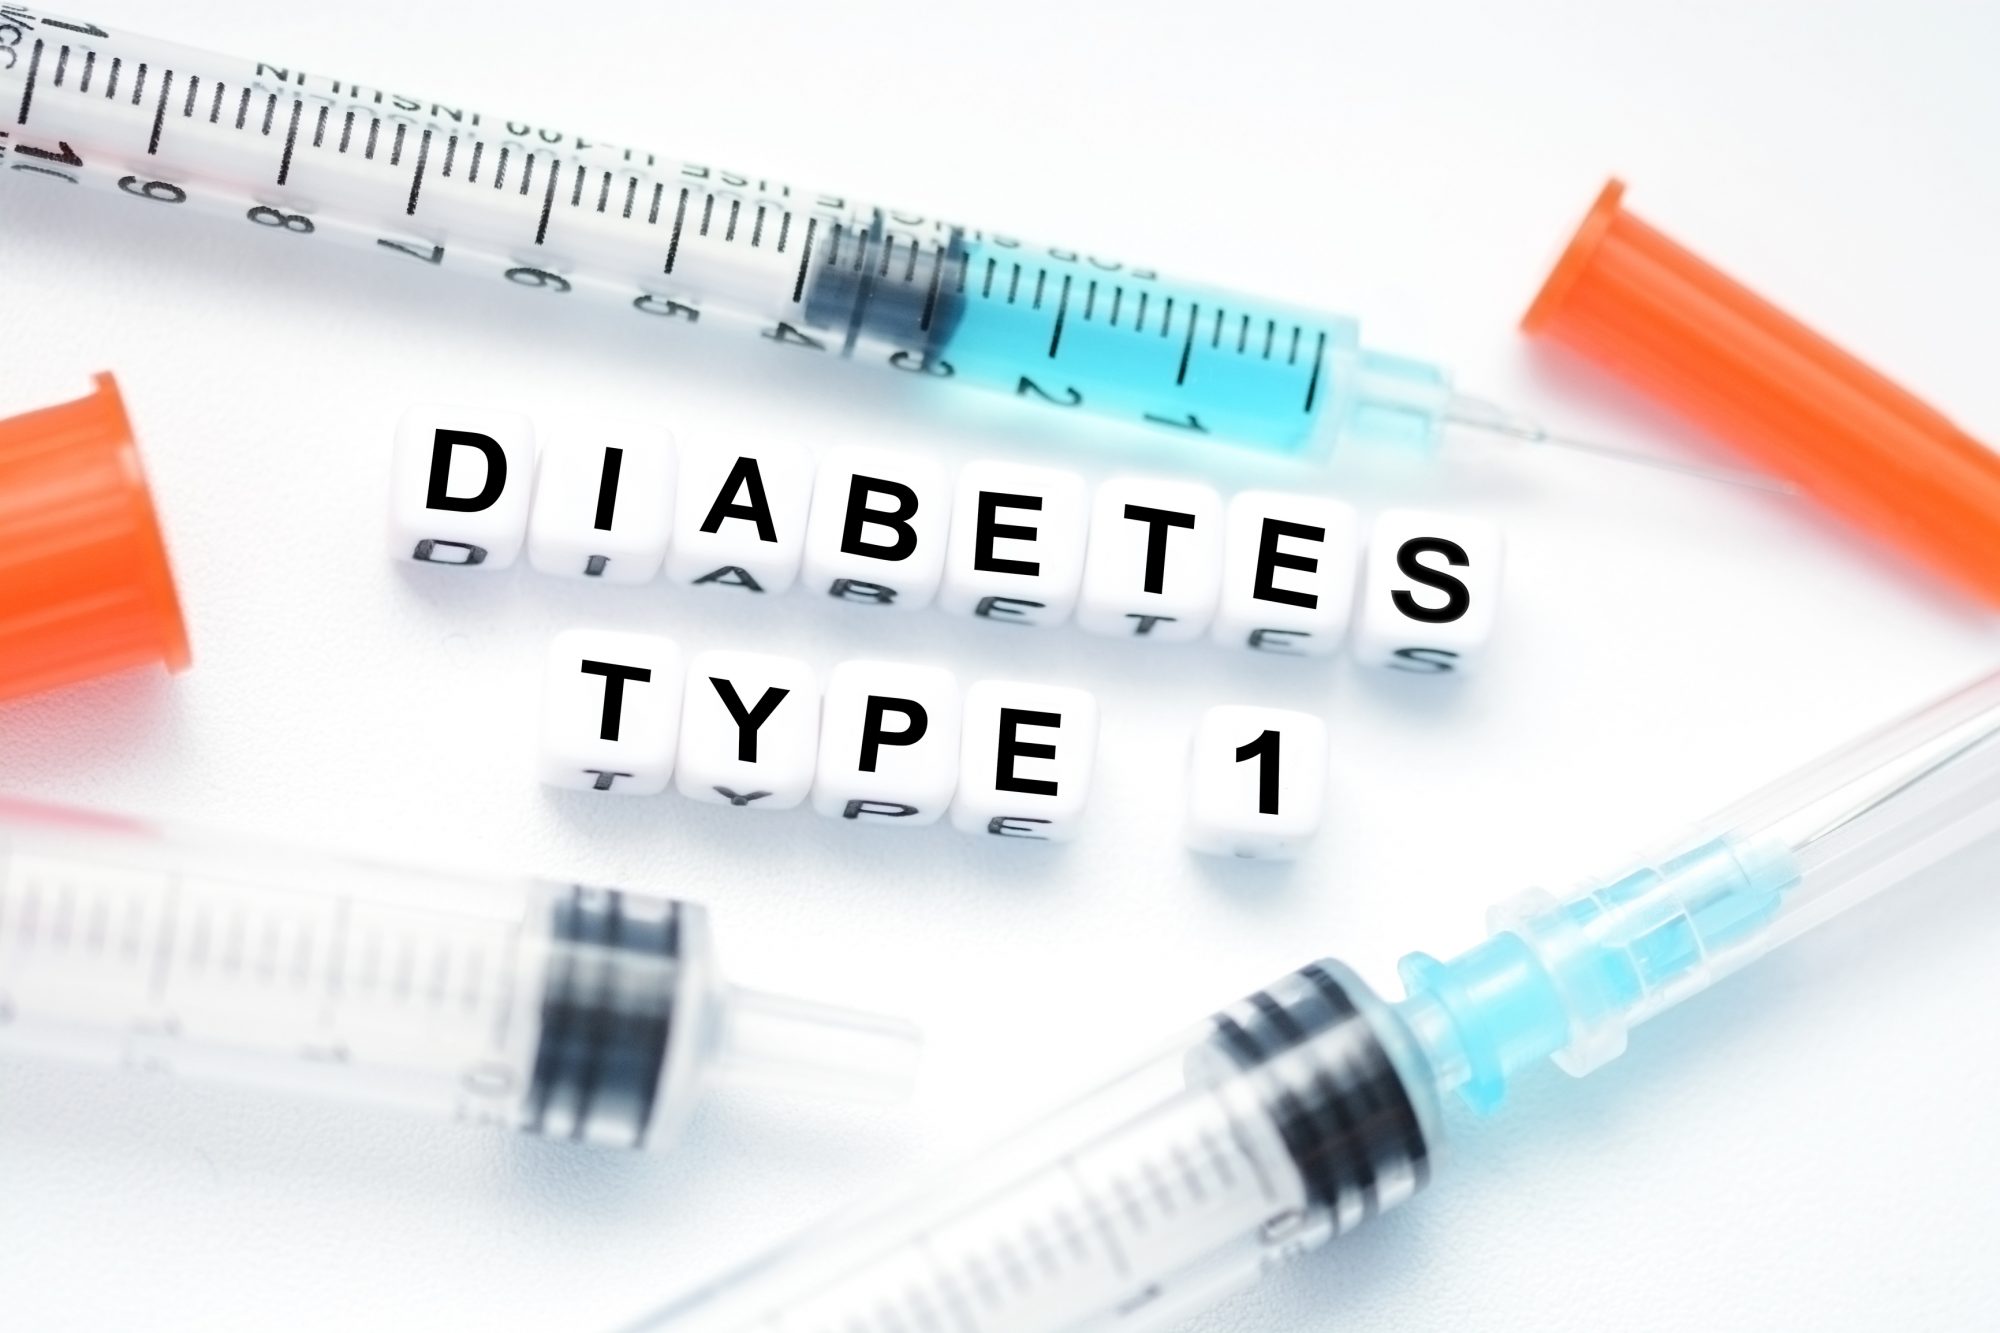 any good news for type 1 diabetes 2021